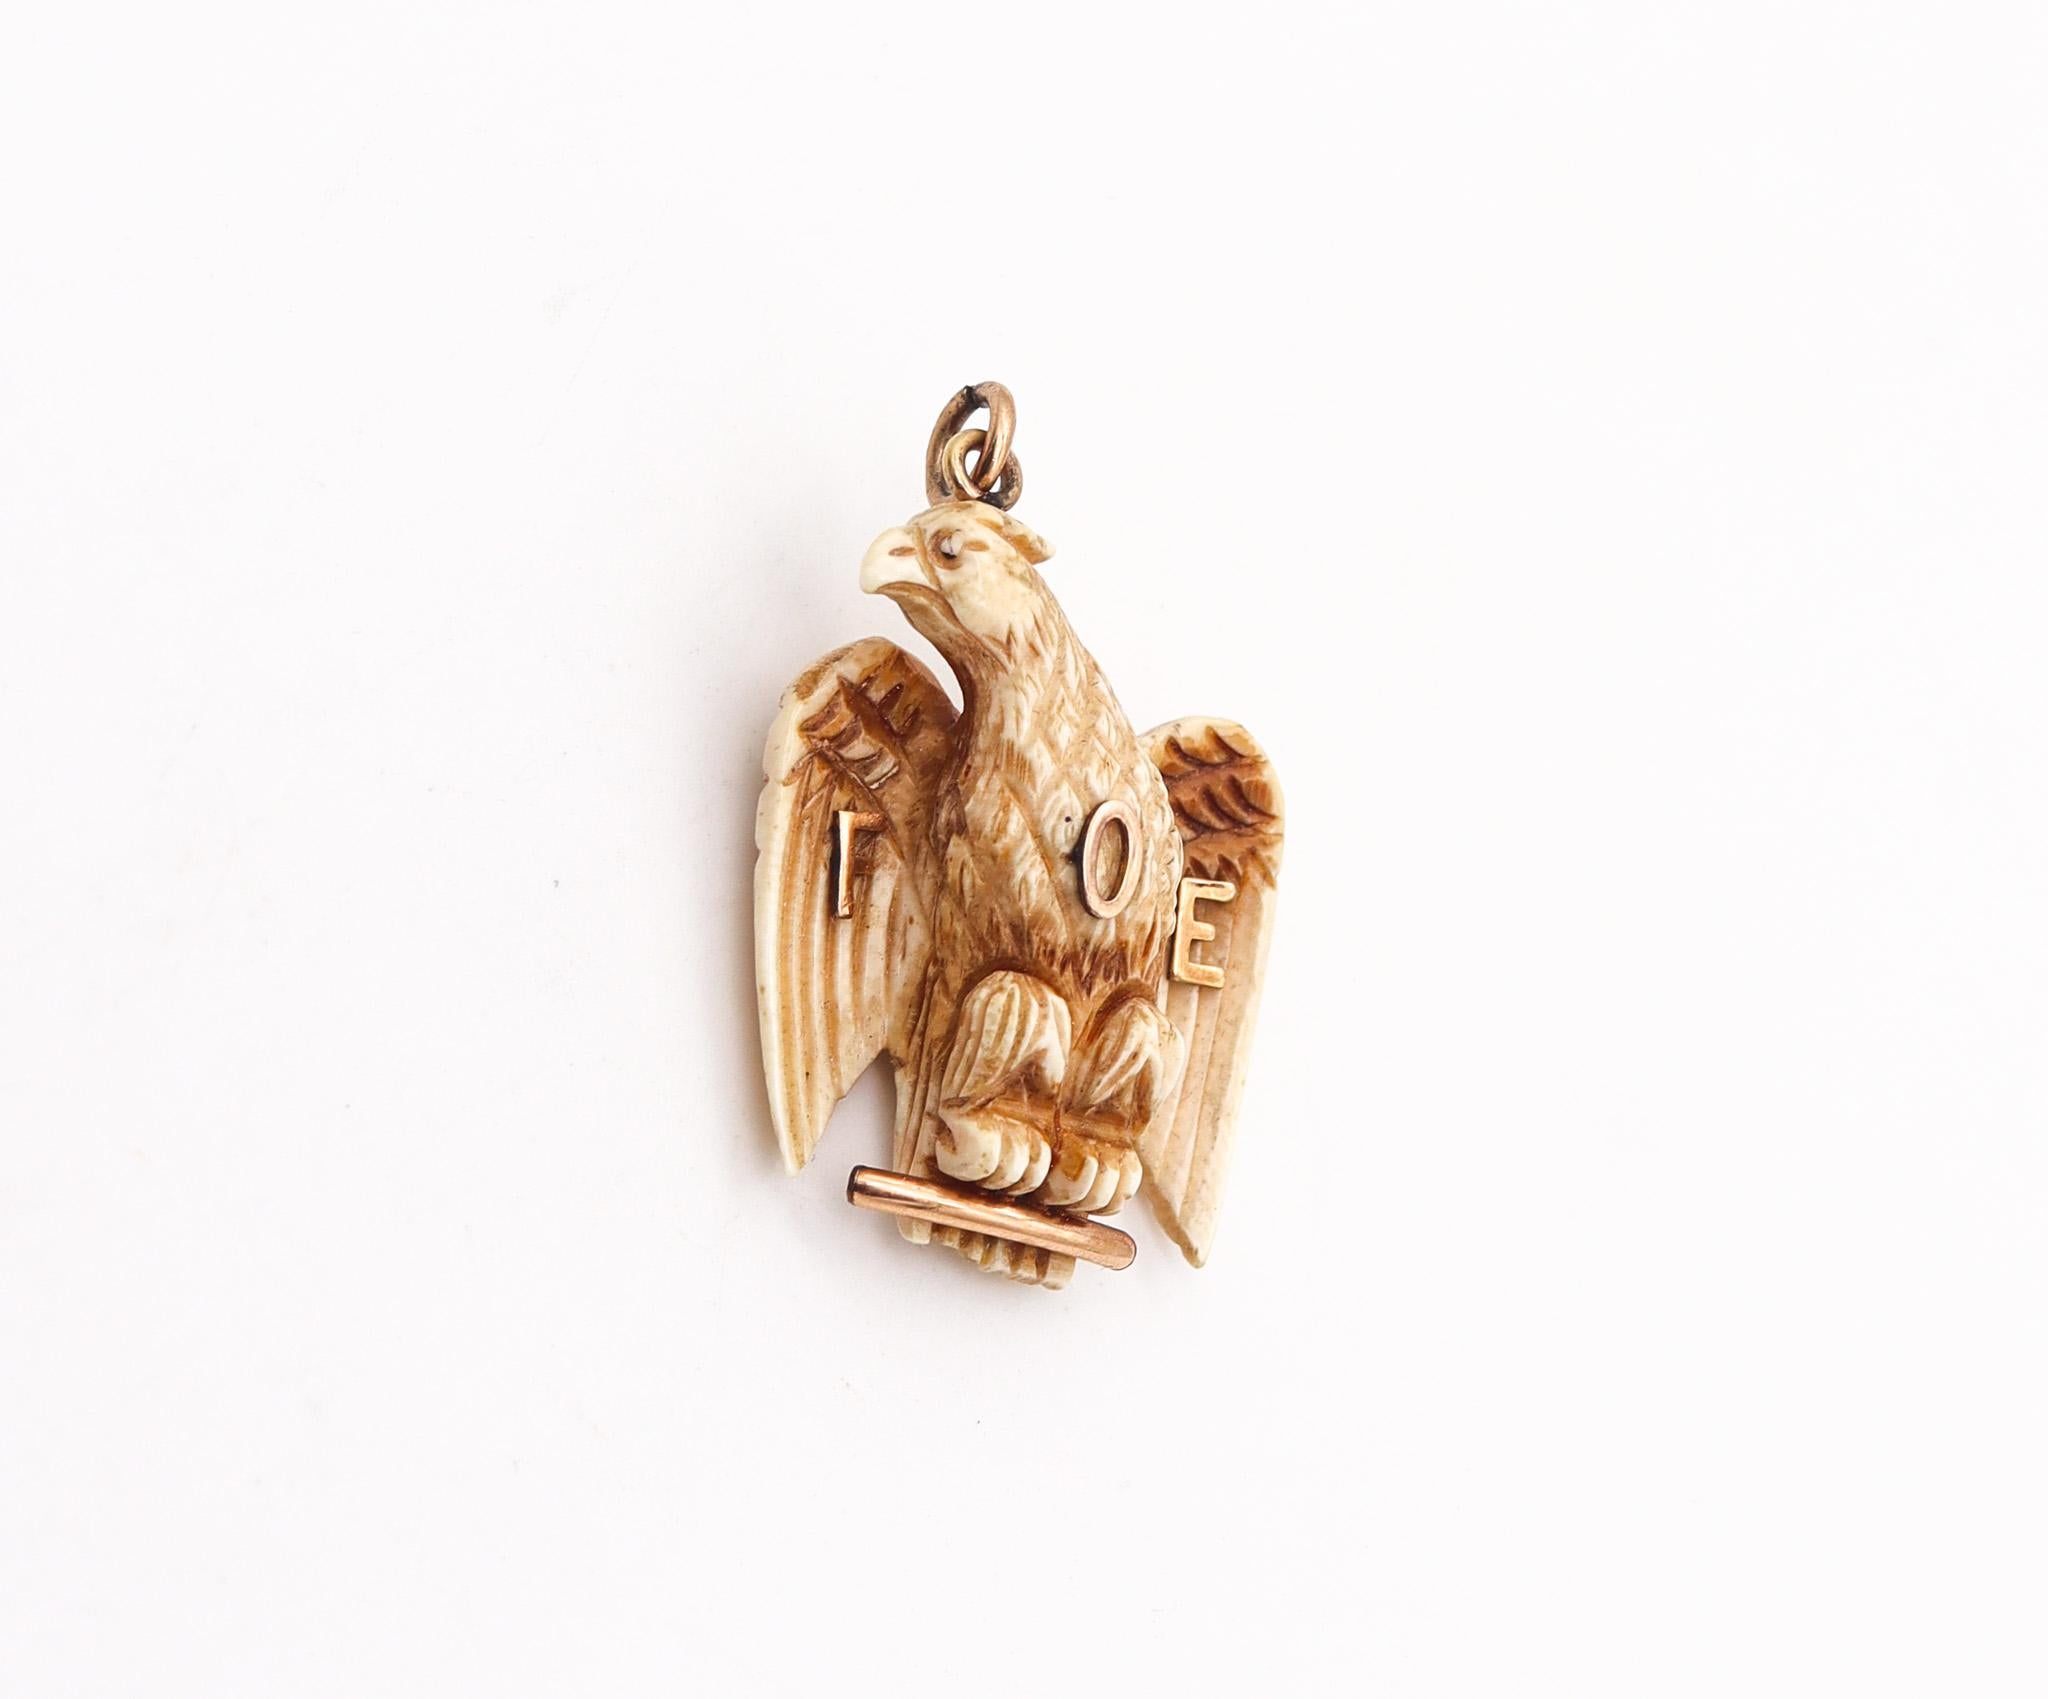 A pendant from the Fraternal Order of Eagles.

Beautiful piece of historical America, from the Fraternal Order of Eagles, made around the 1900. It was carved in the shape of the American eagle and accented with parts made up in yellow gold of 10